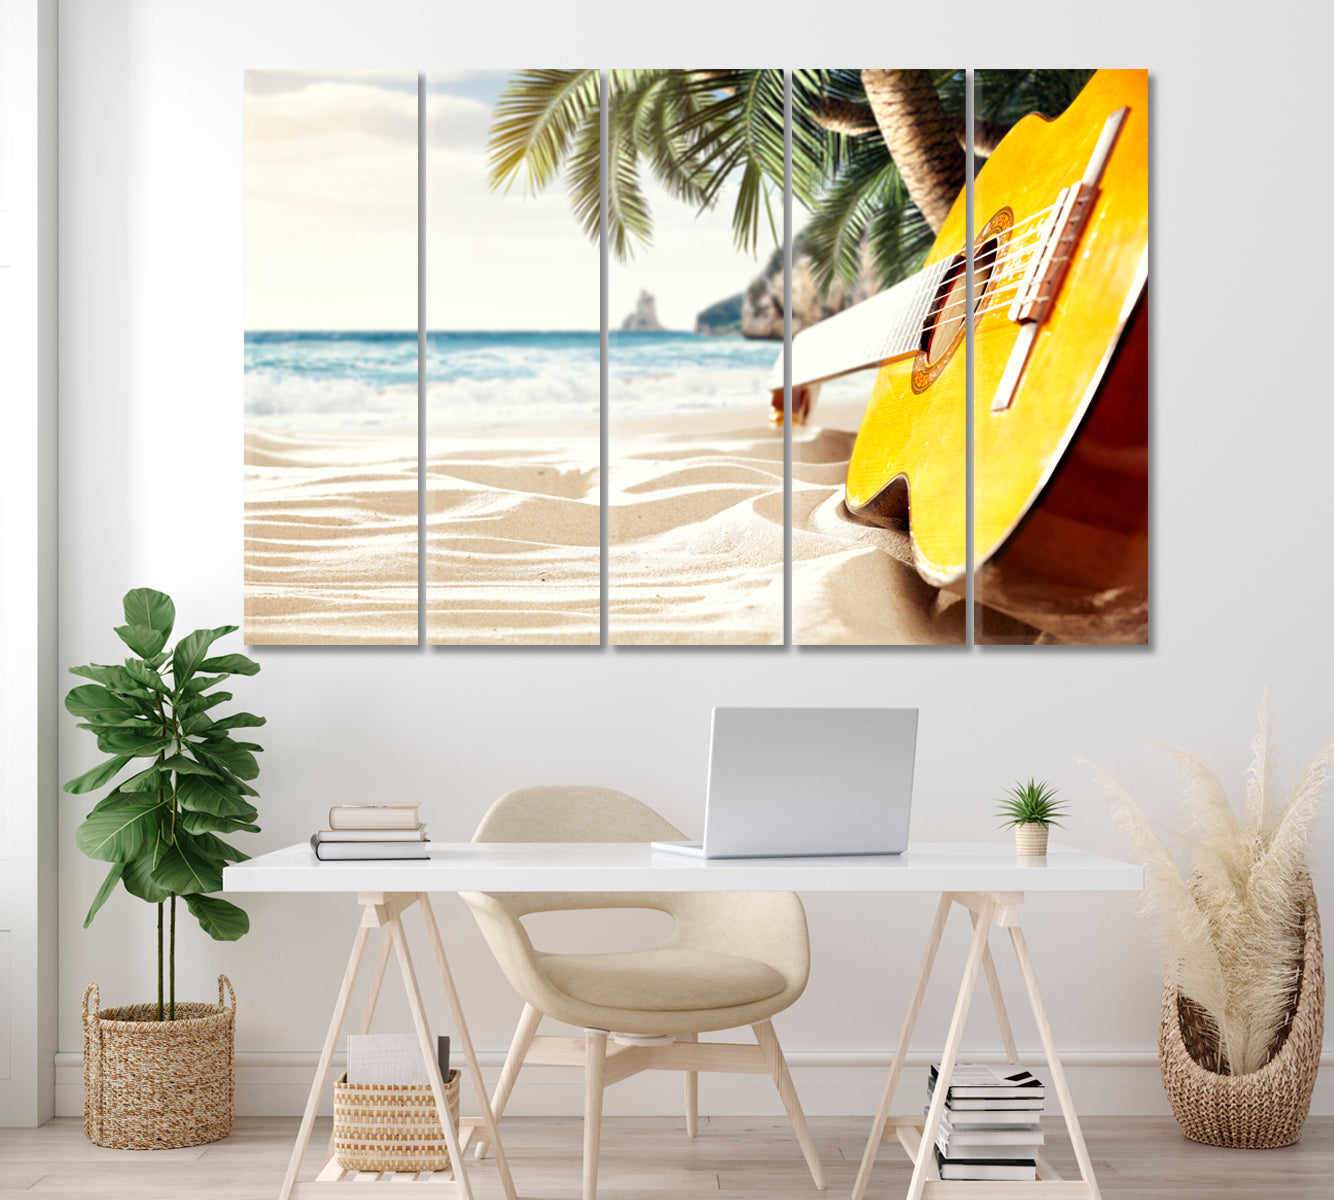 Guitar on the Sand Beach Canvas Print ArtLexy 5 Panels 36"x24" inches 